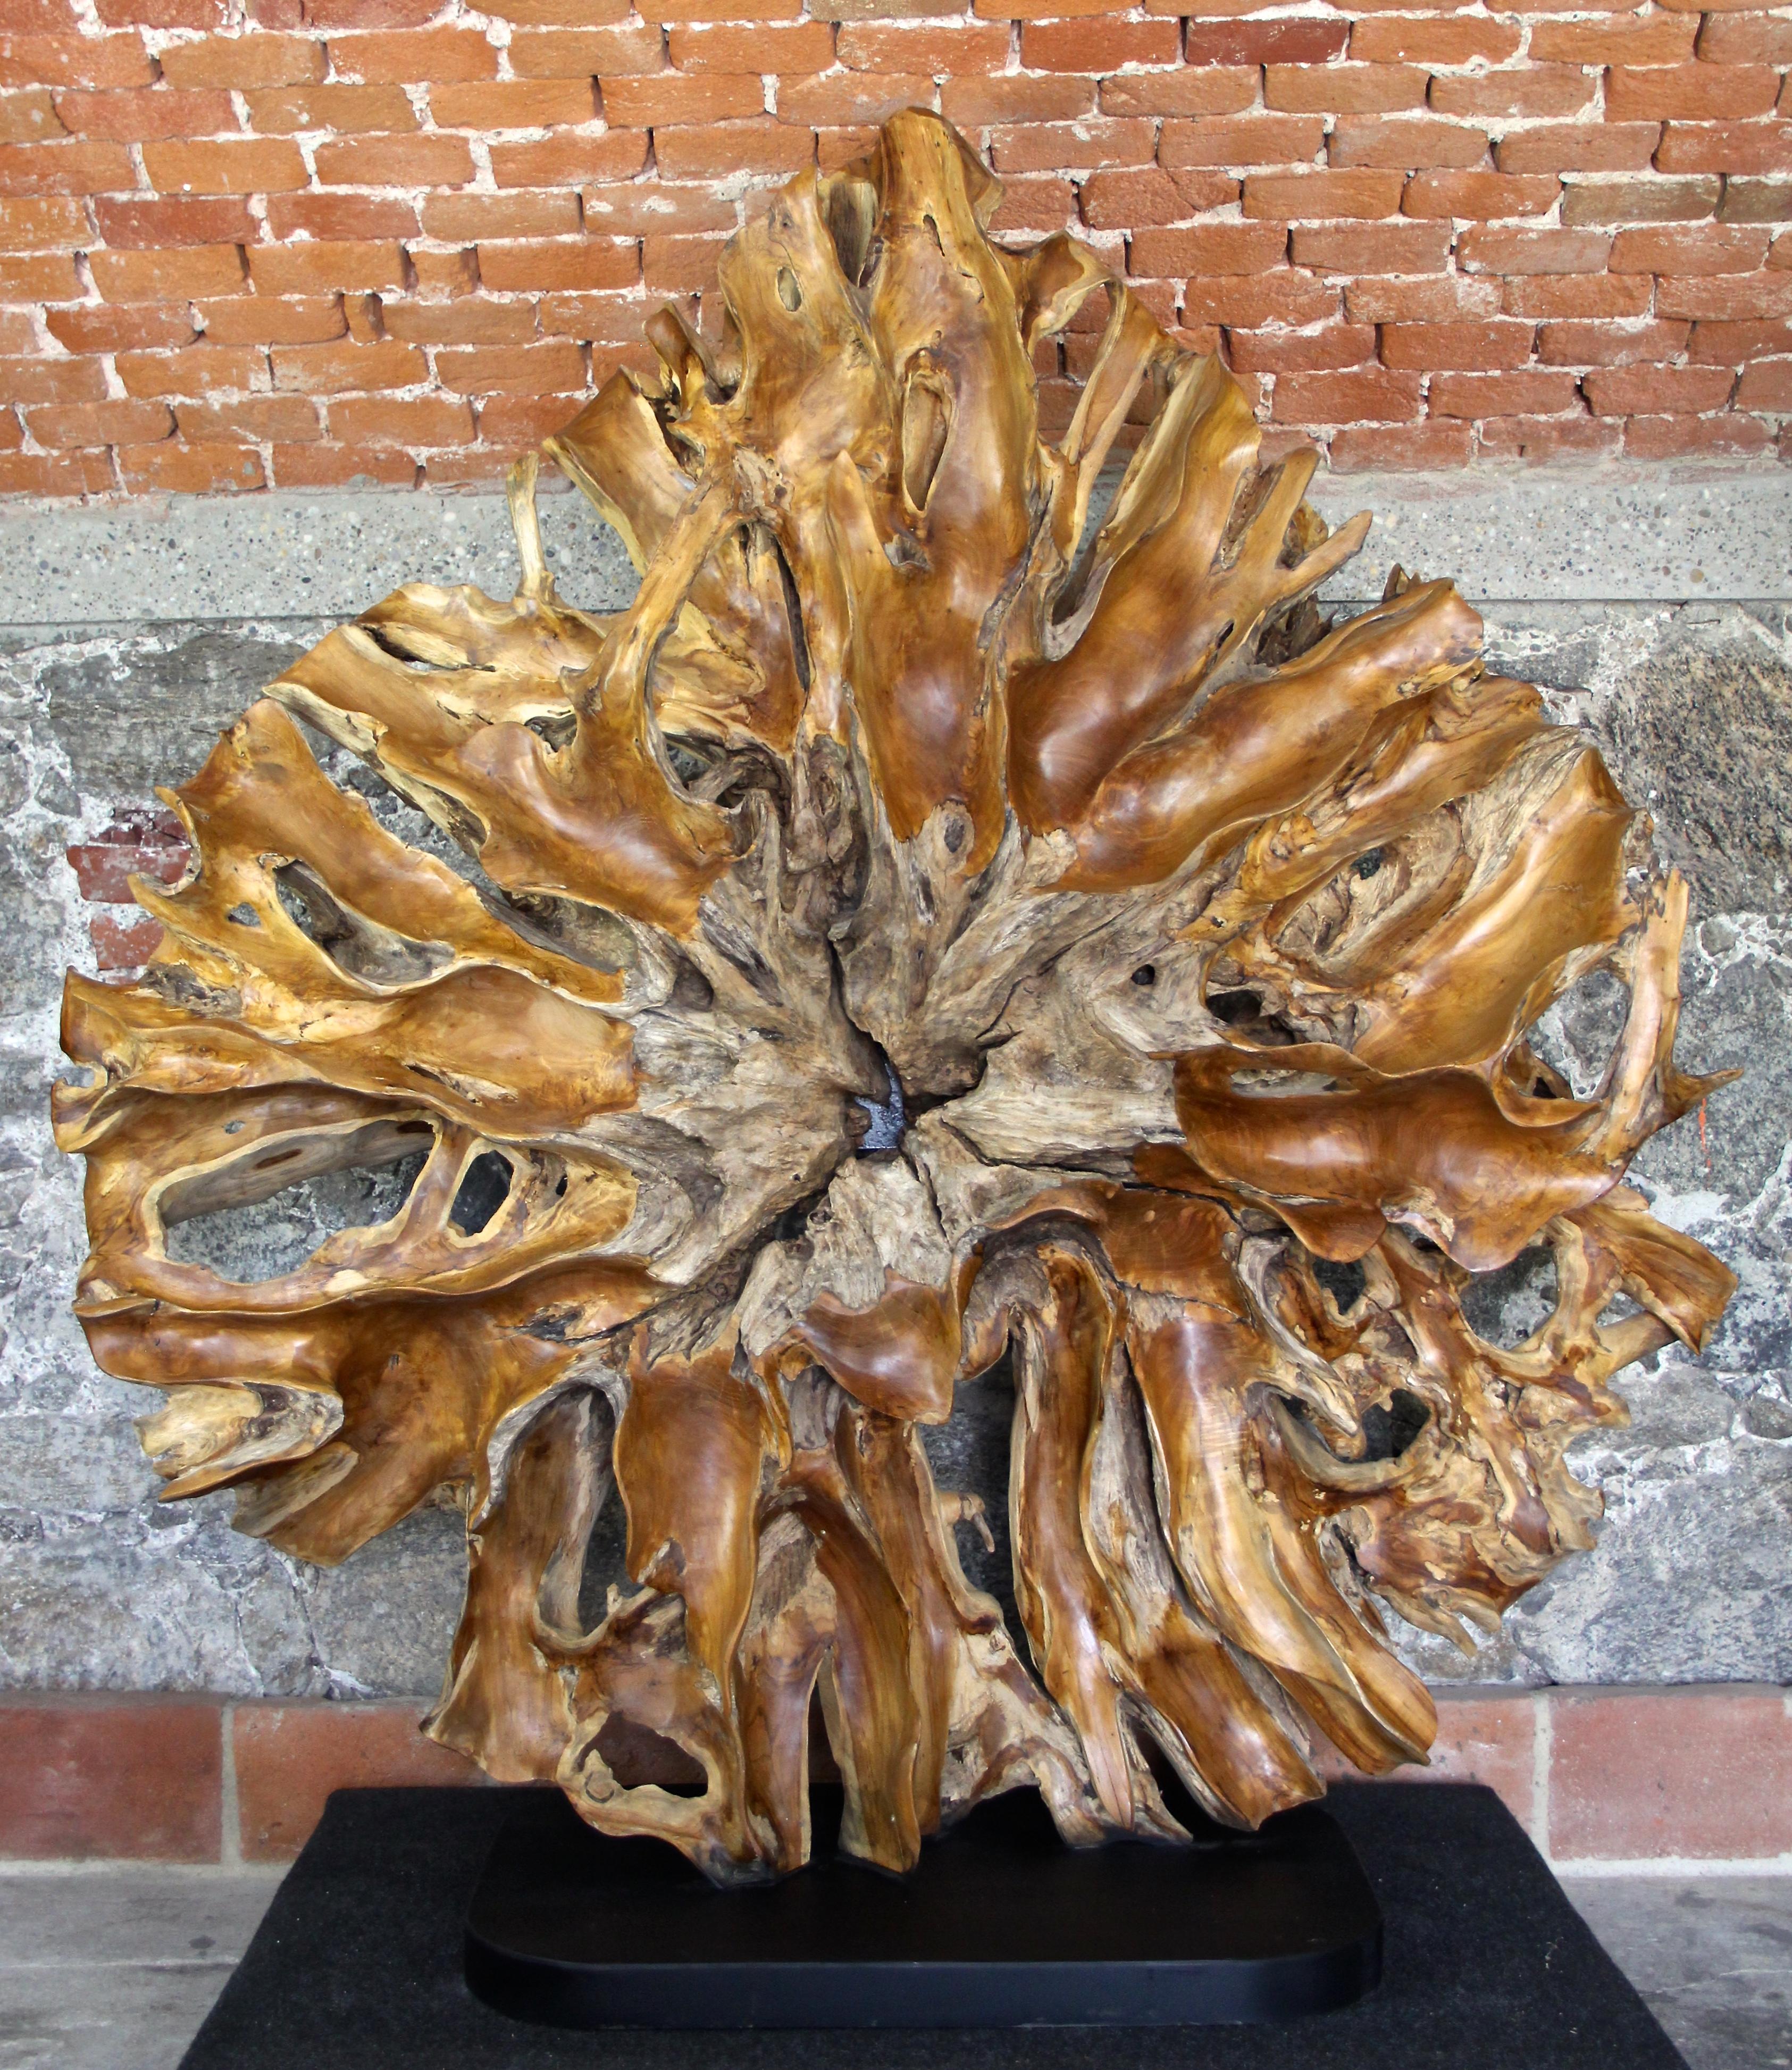 Amazing massive teak root sculpture out of Indonesia. Artfully processed by a highly talented local artist, this large decorative teak root sculpture has been hollowed and polished in weeks of hard work to make it what it is: an absolute unique eye